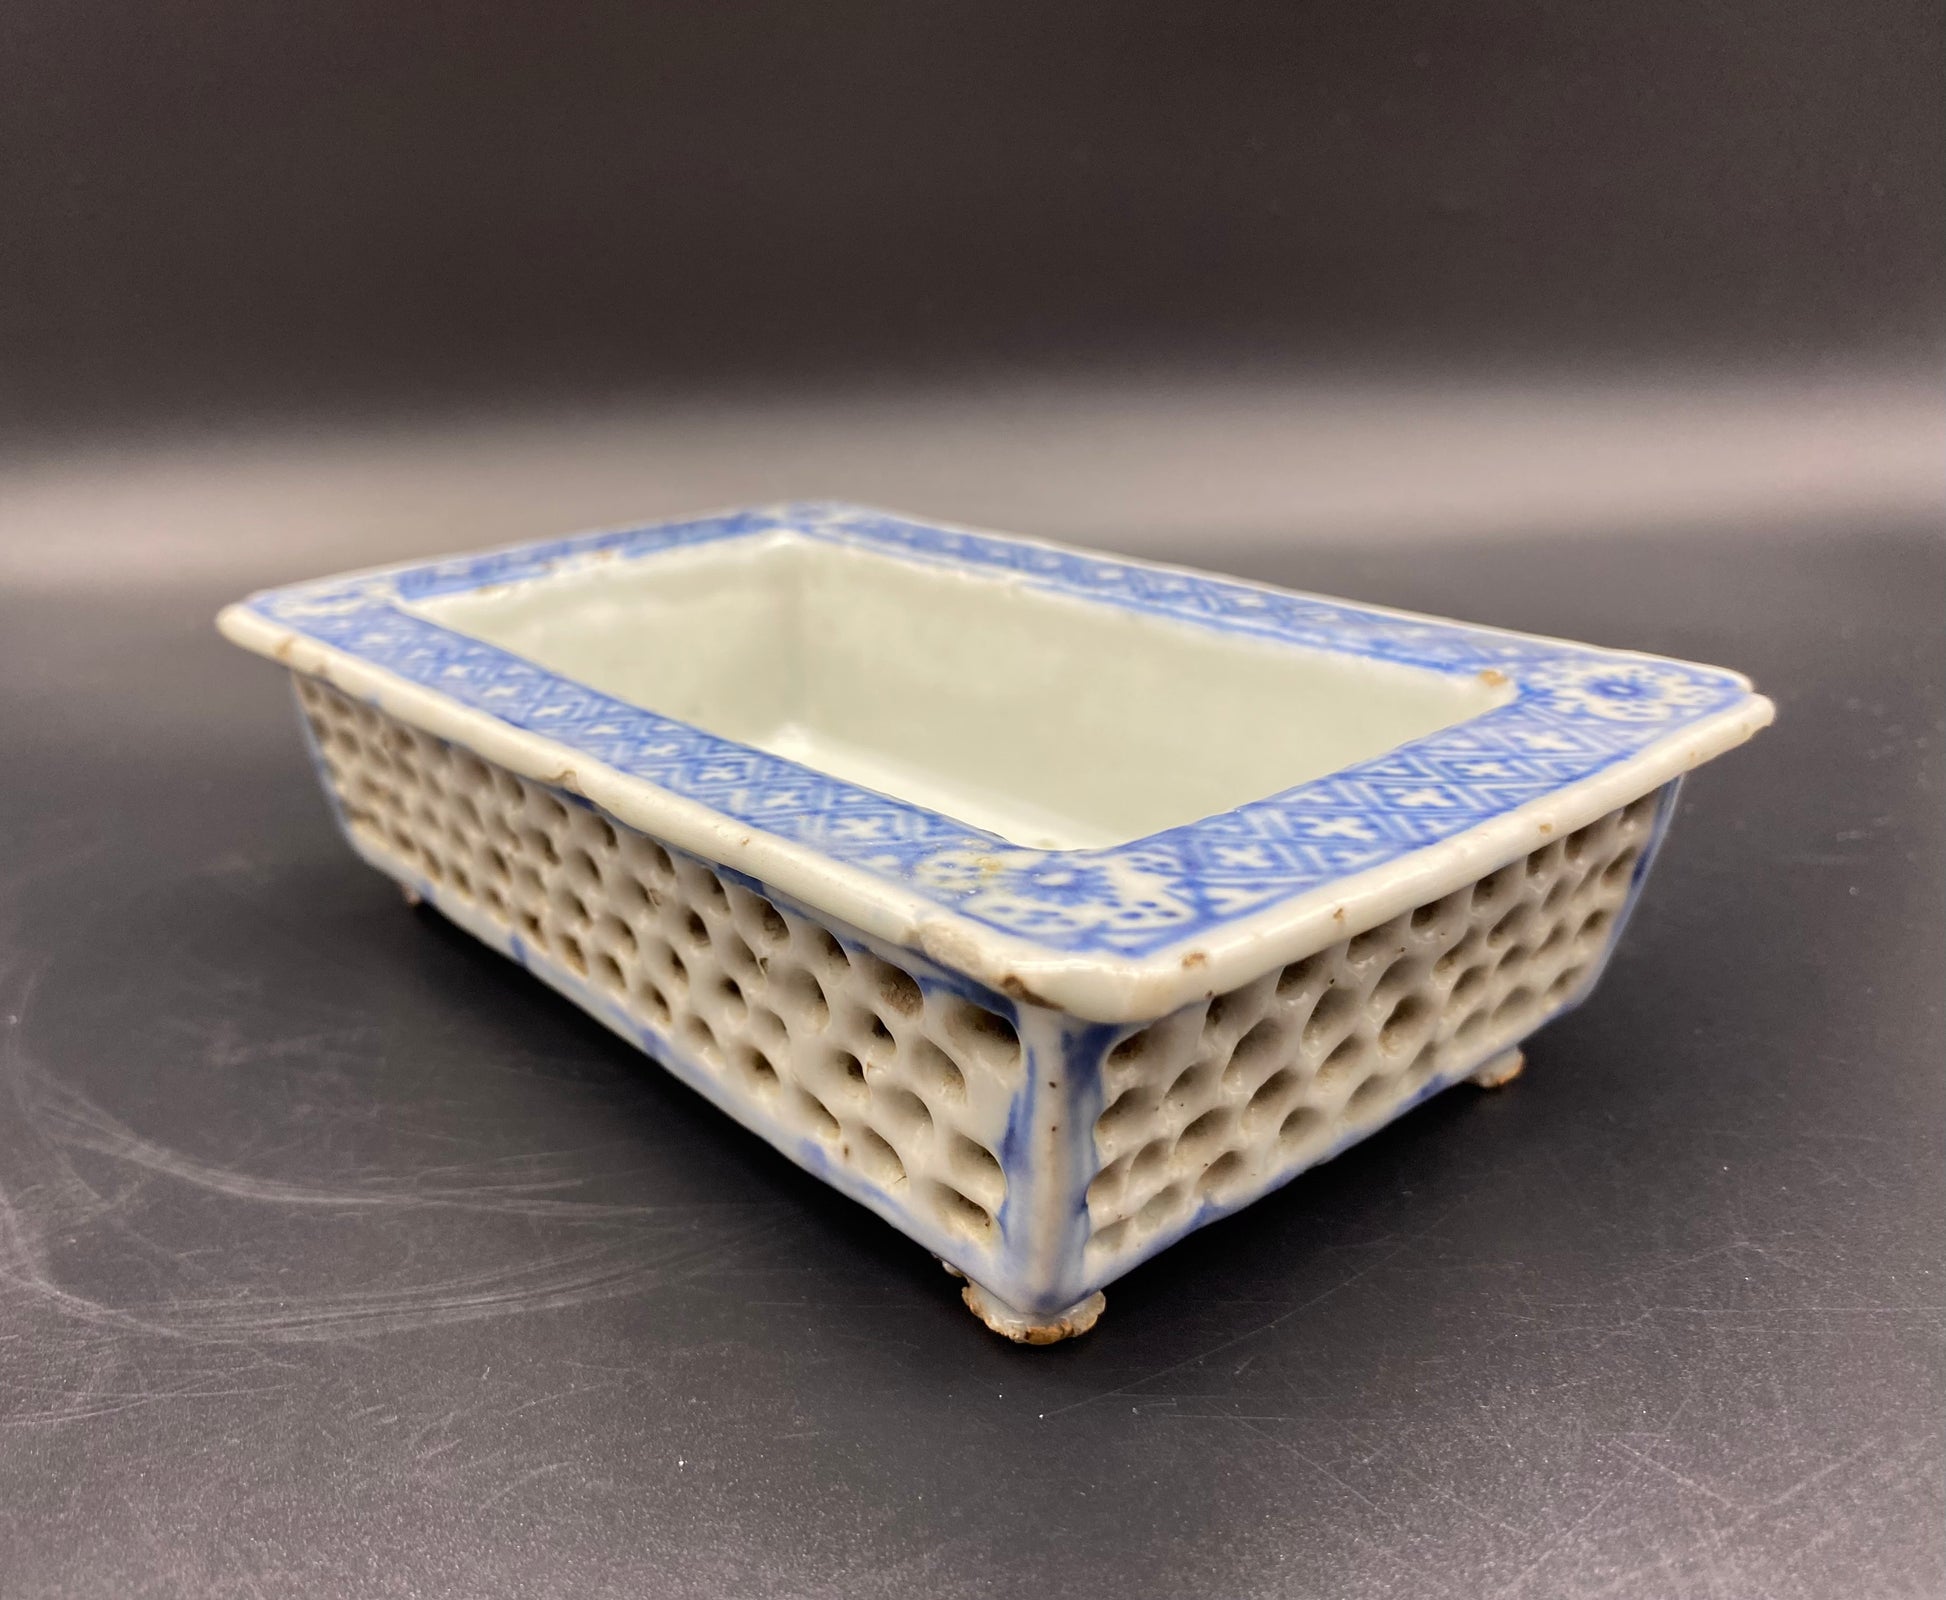 Chinese Qing Reticulated Porcelain Planter / Bonsai Tree Pot   18 / 19th Century Chinese Blue & White Porcelain planter  Condition : The Planter has chips to the corners and firing flaws ( SEE PHOTOS )